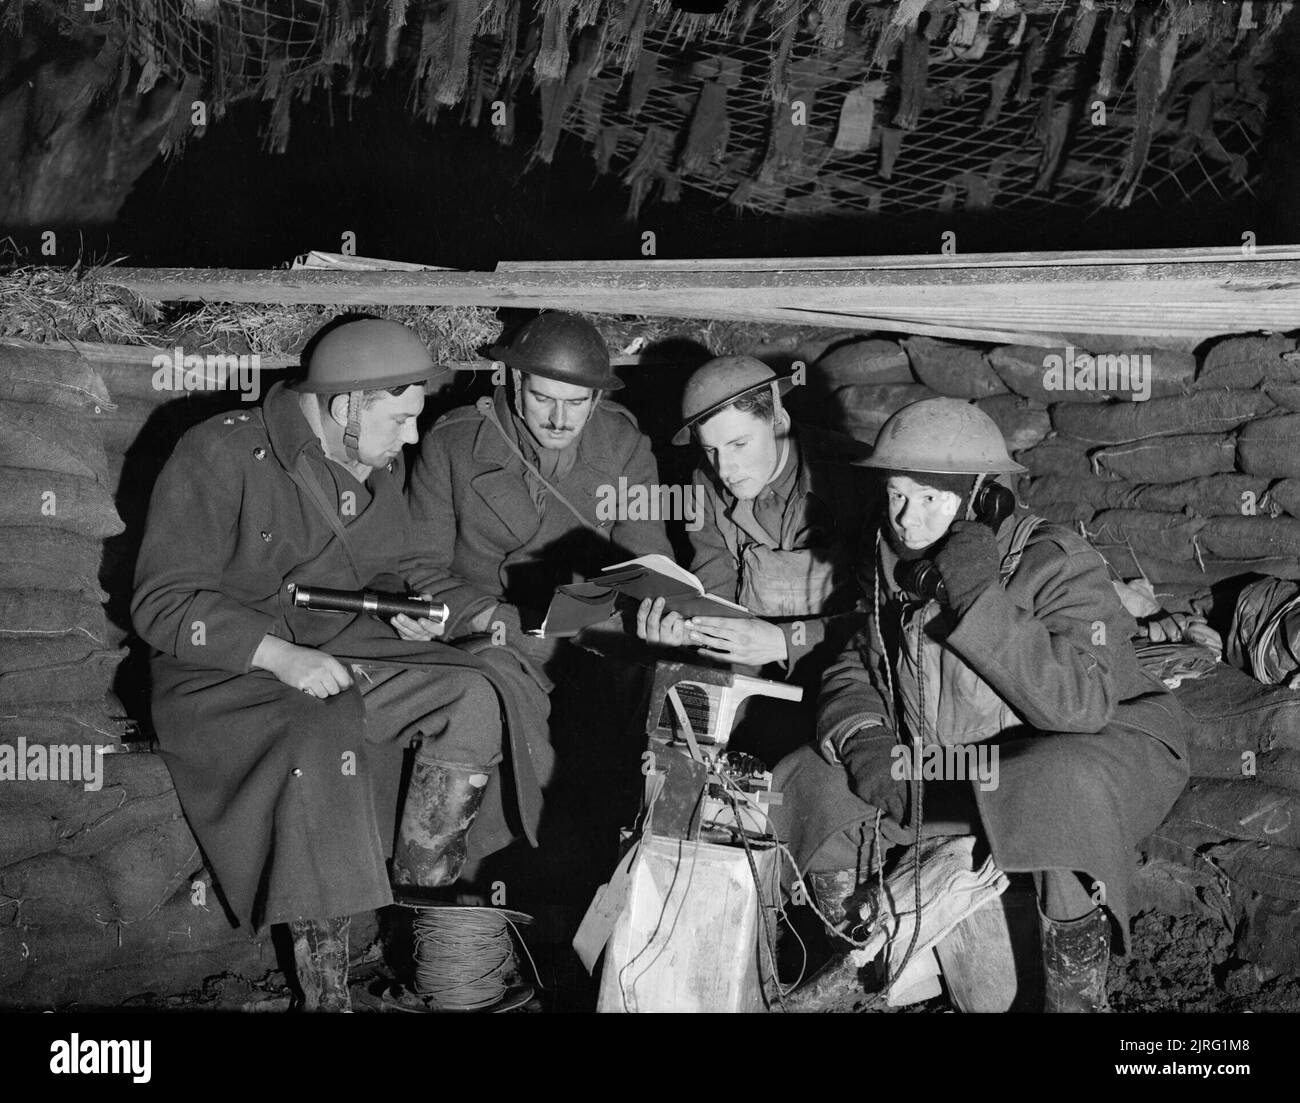 The cramped interior of the battery commander's dugout at a 25-pdr field gun battery near Mouchin, France, 29 November 1939. The cramped interior of the battery commander's dugout at a 25-pdr field gun battery near Mouchin, 29 November 1939. Stock Photo